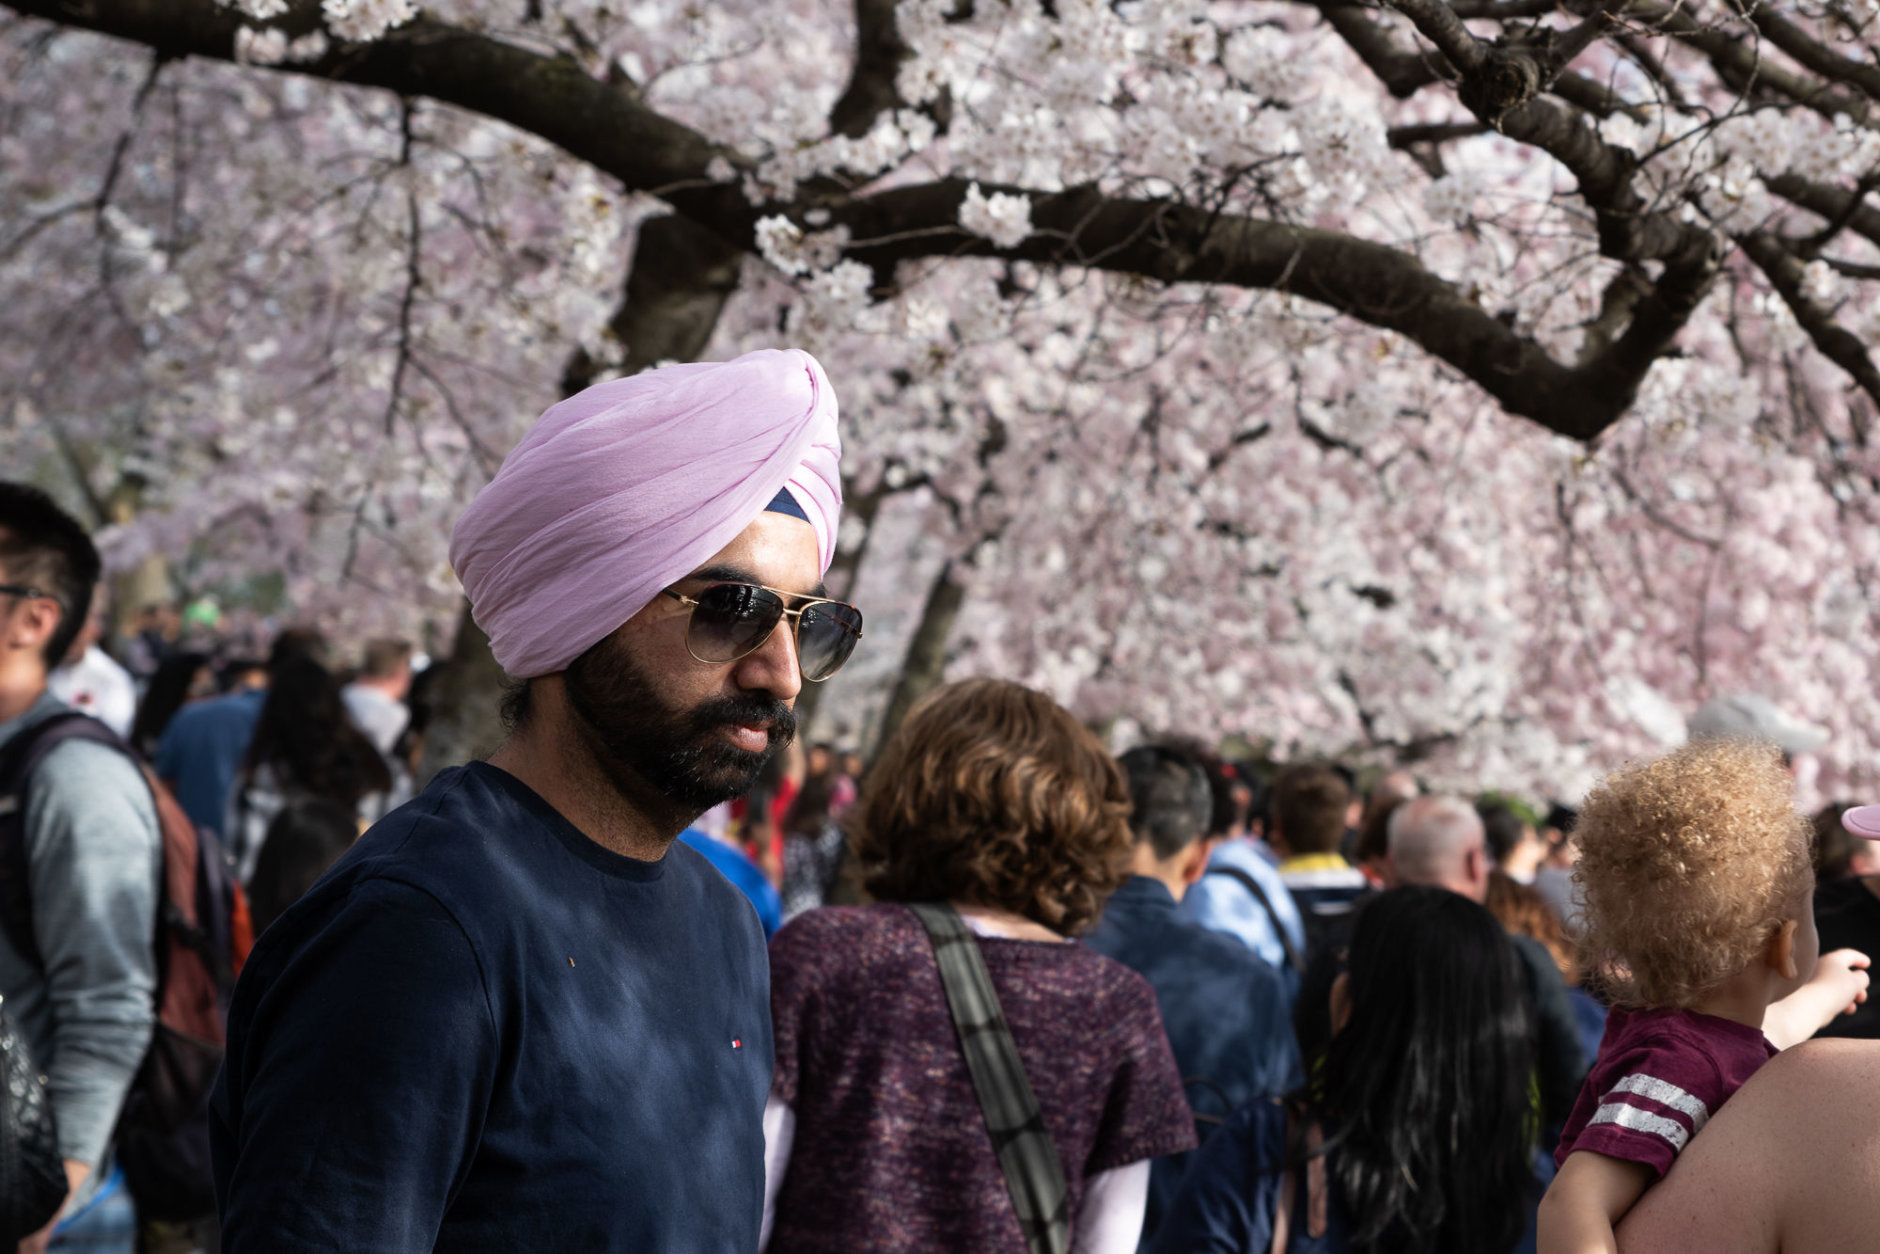 A visitor to the cherry blossom festival is seen on March 30, two days before the peak bloom forecast by the National Park Service. (WTOP/Alejandro Alvarez)